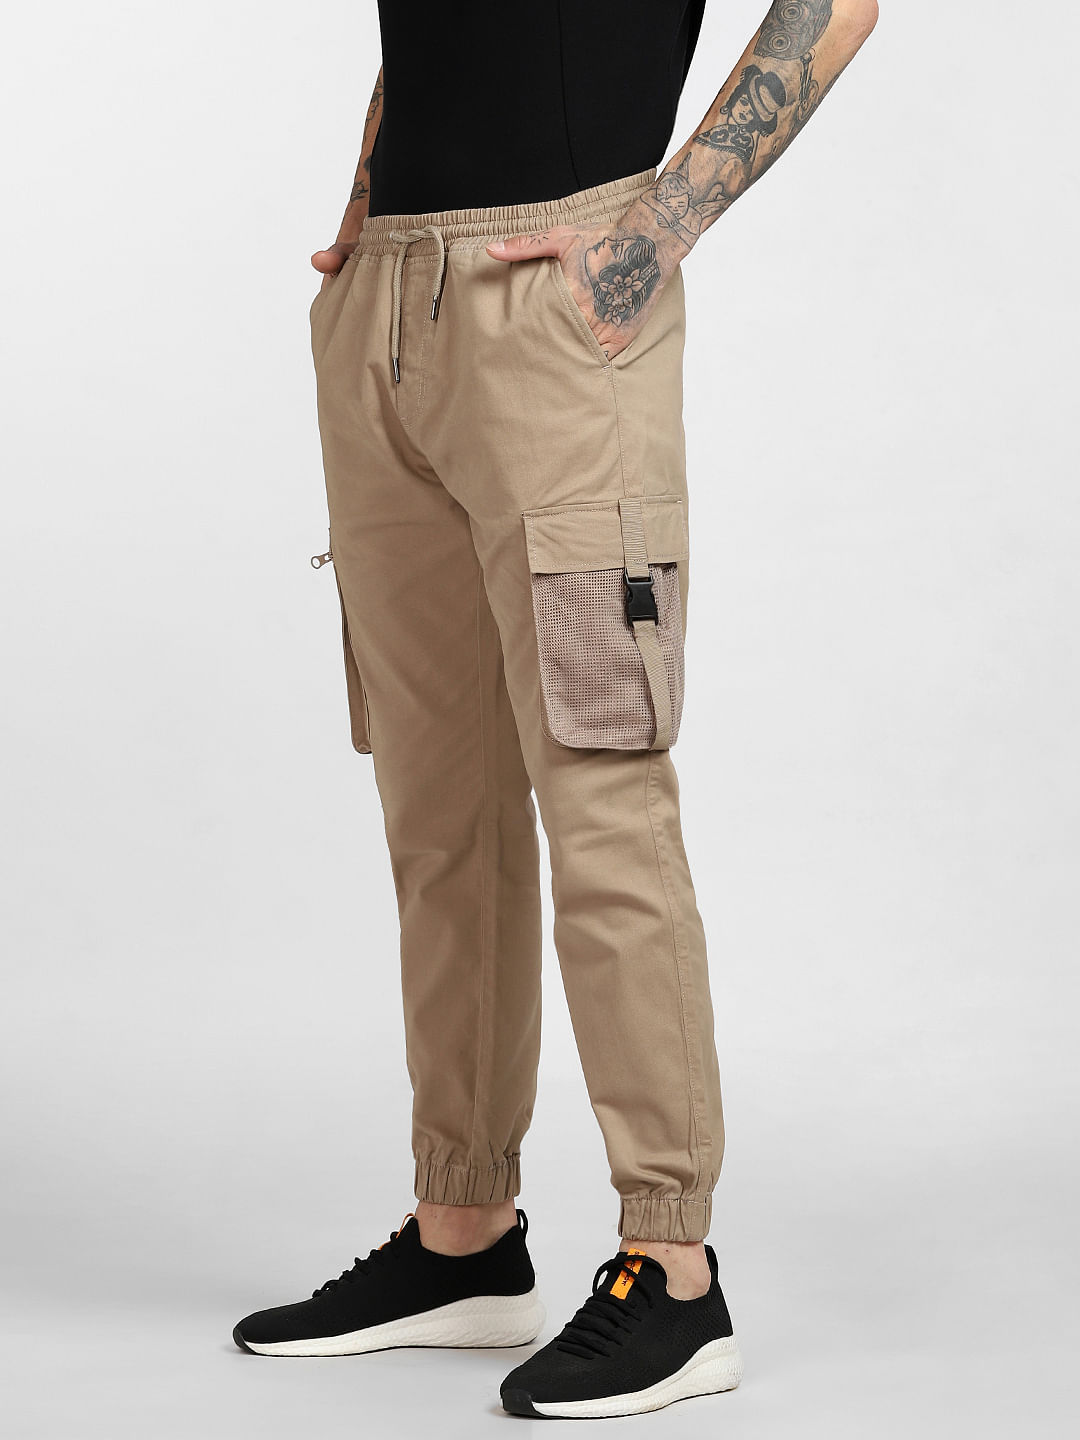 Low waist cargo jeans - Gina Tricot